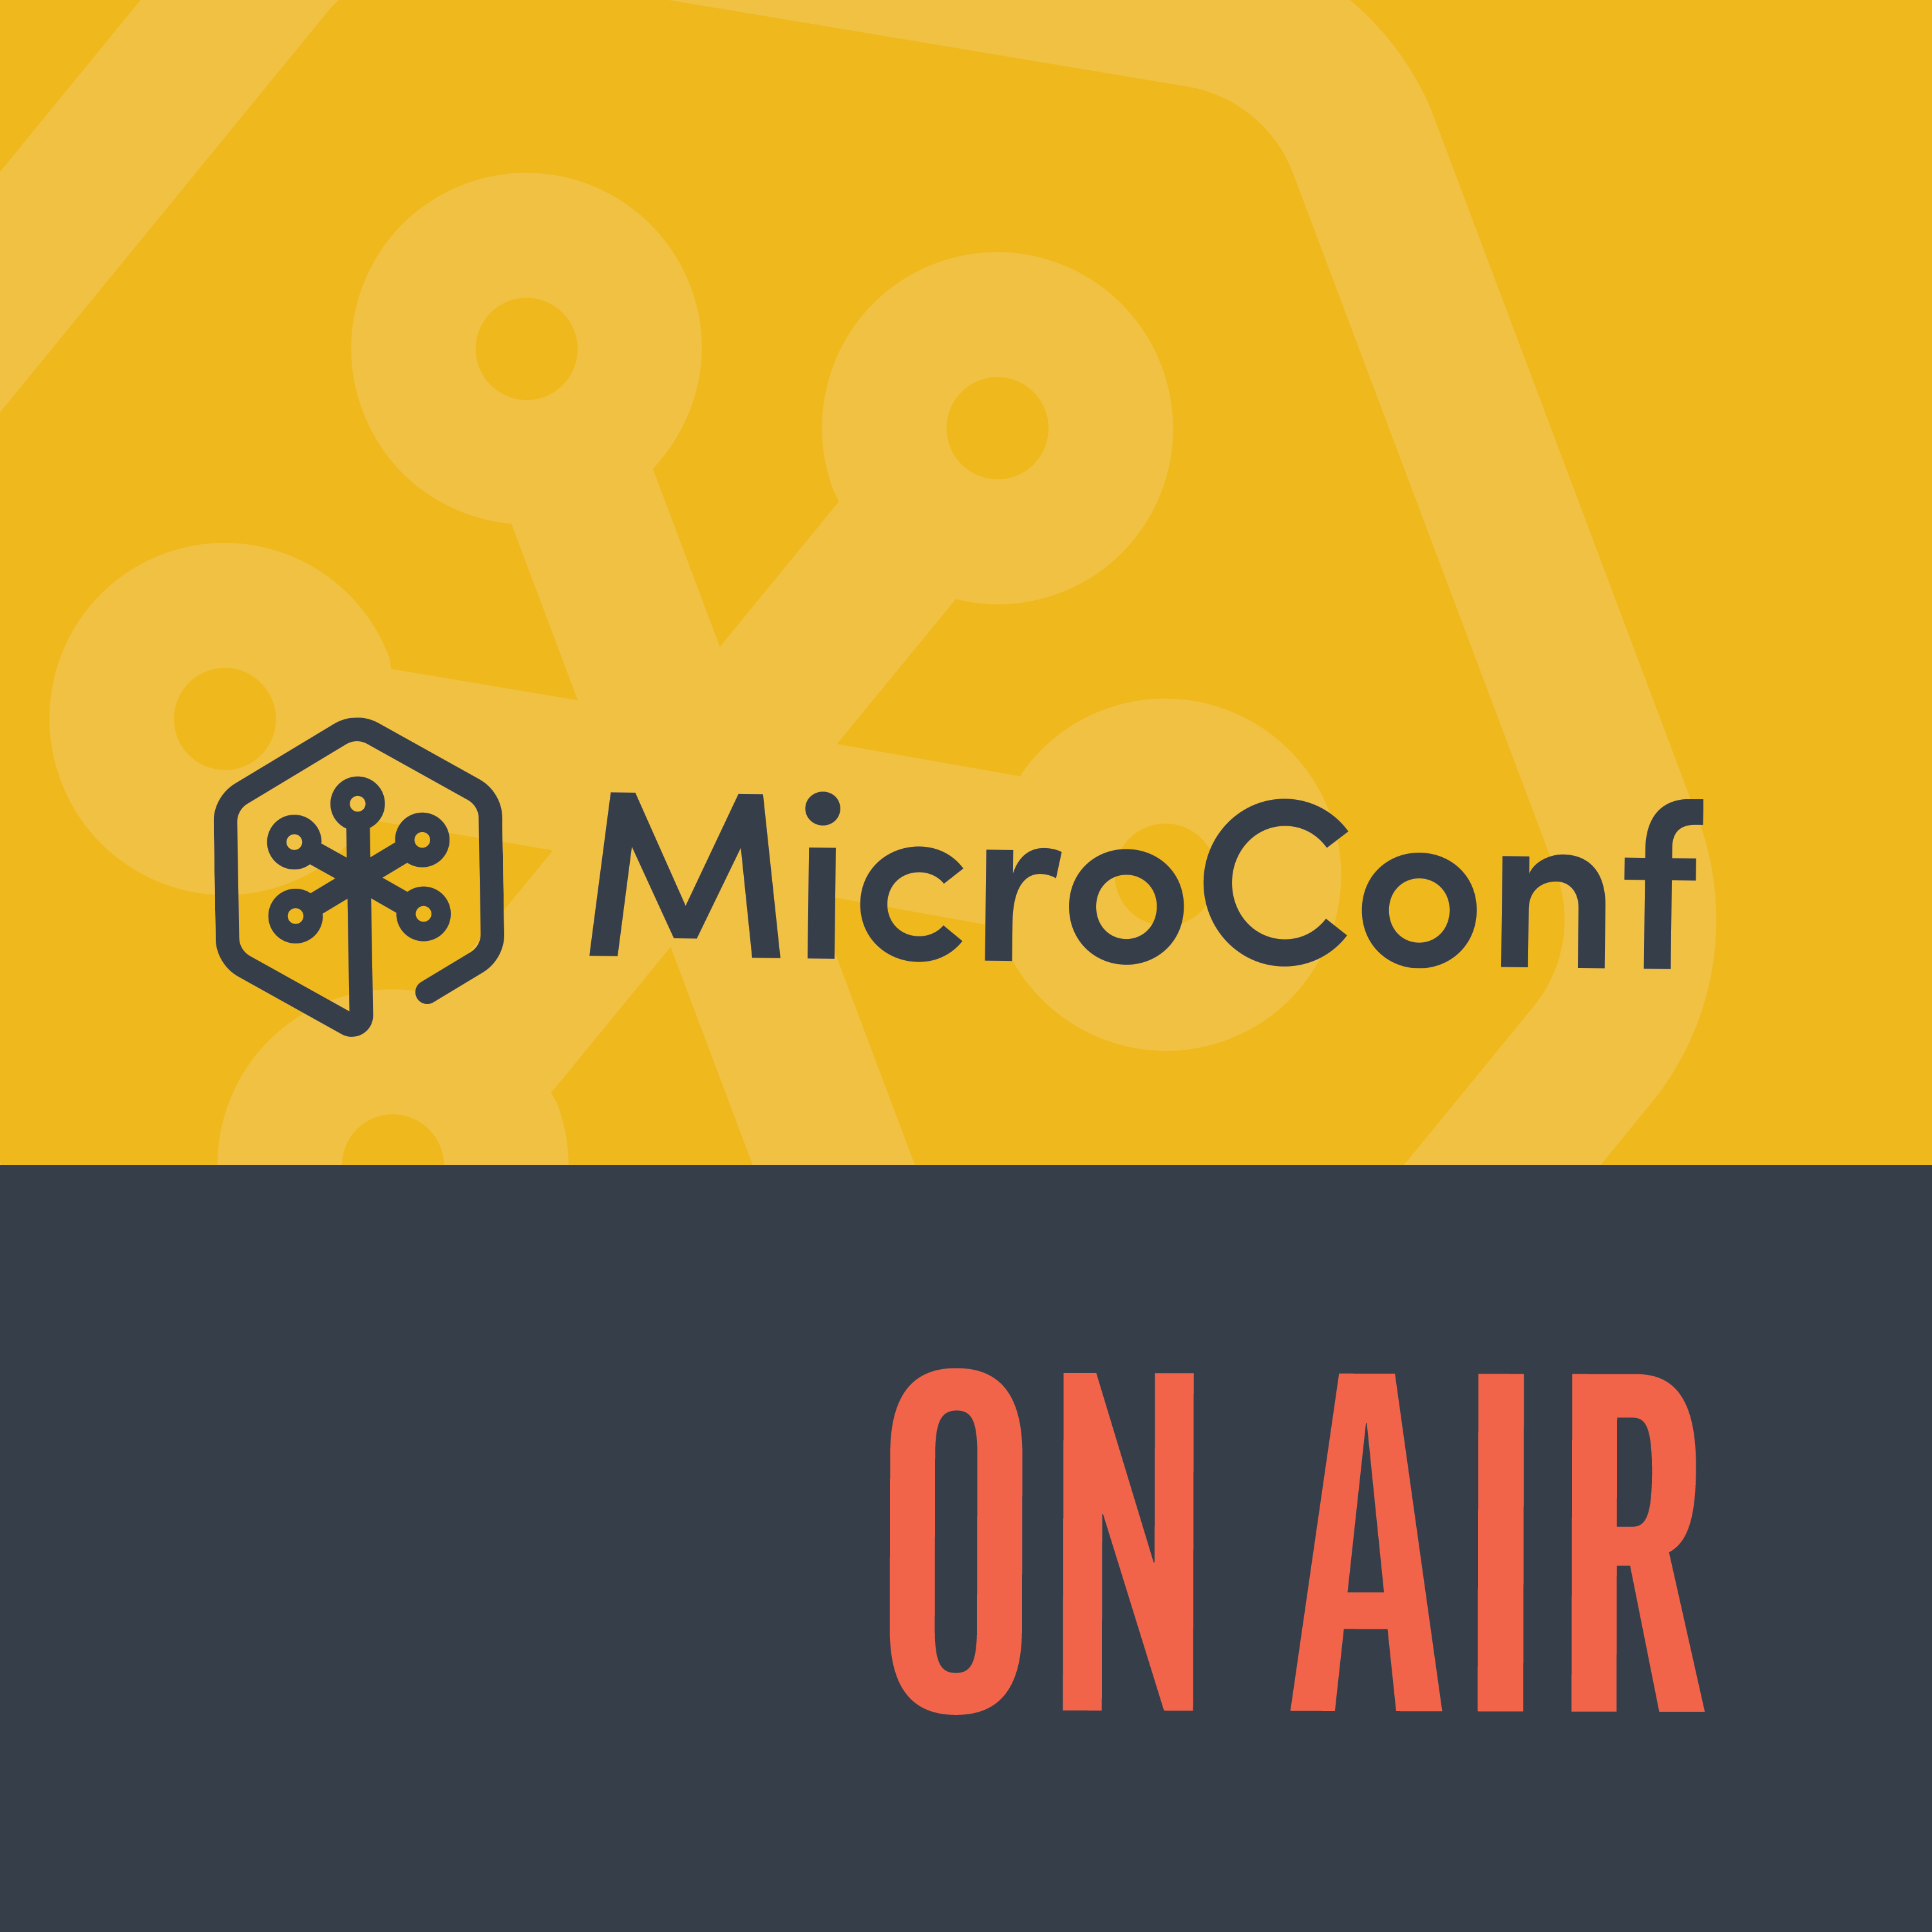 MicroConf Refresh Episode 20: Scatterspoke and the Road to $10K MRR: Colleen Johnson - MicroConf Remote